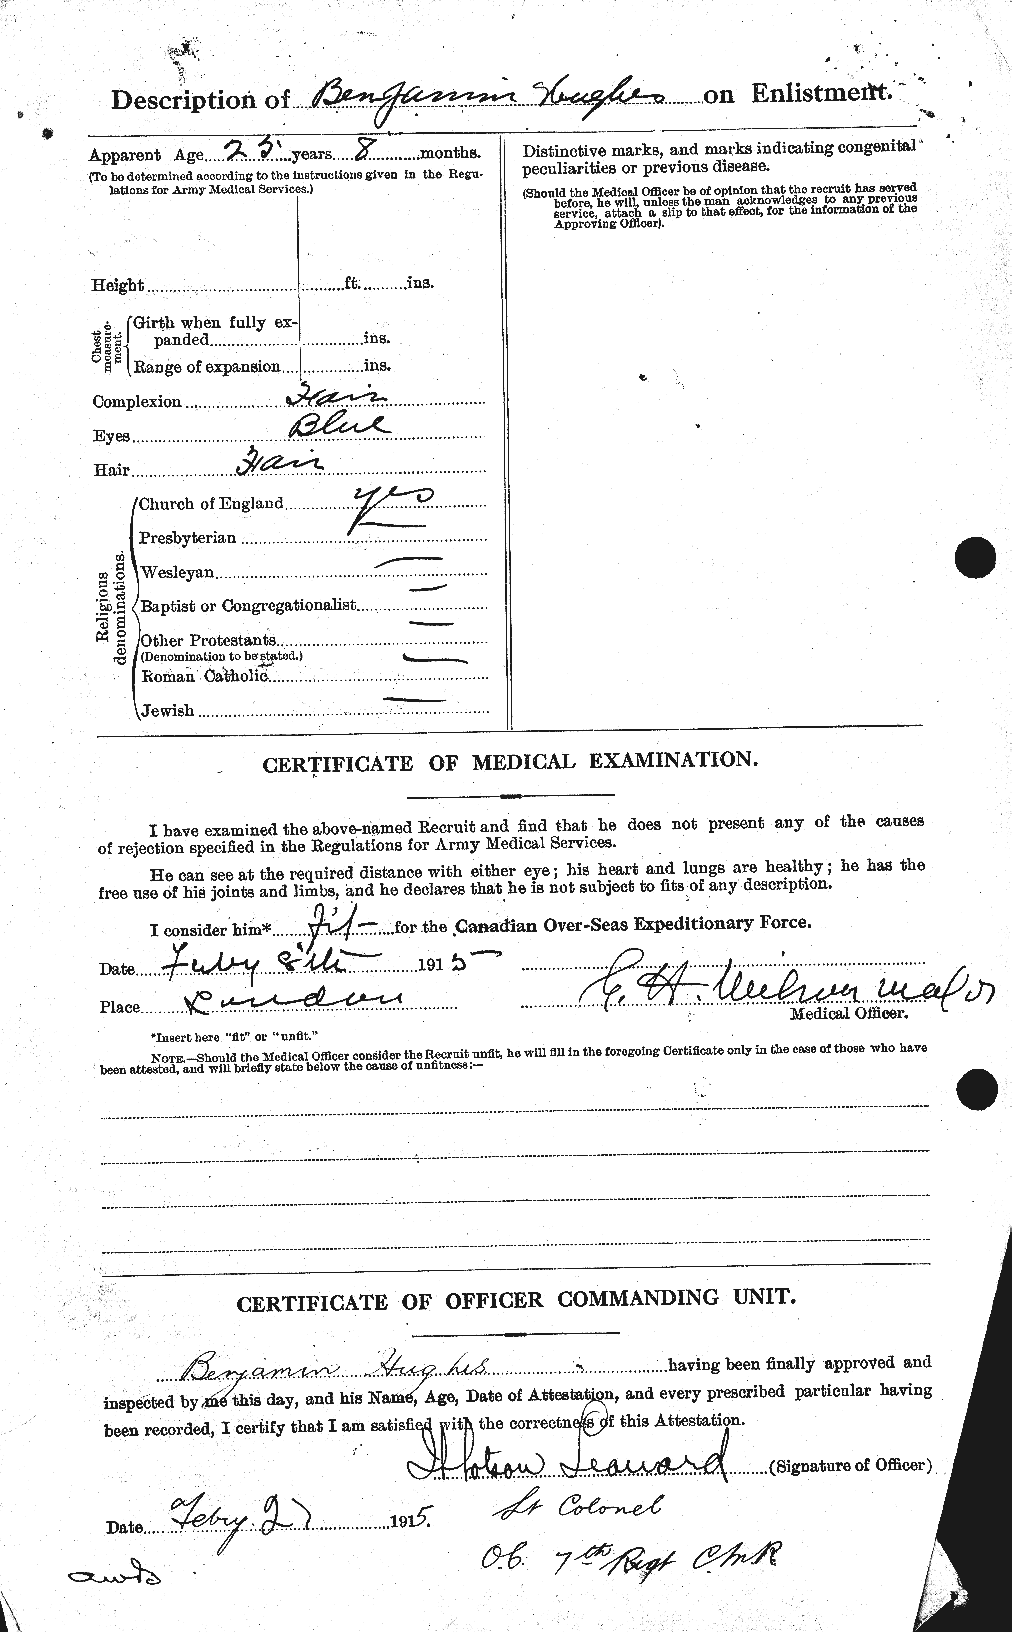 Personnel Records of the First World War - CEF 402575b